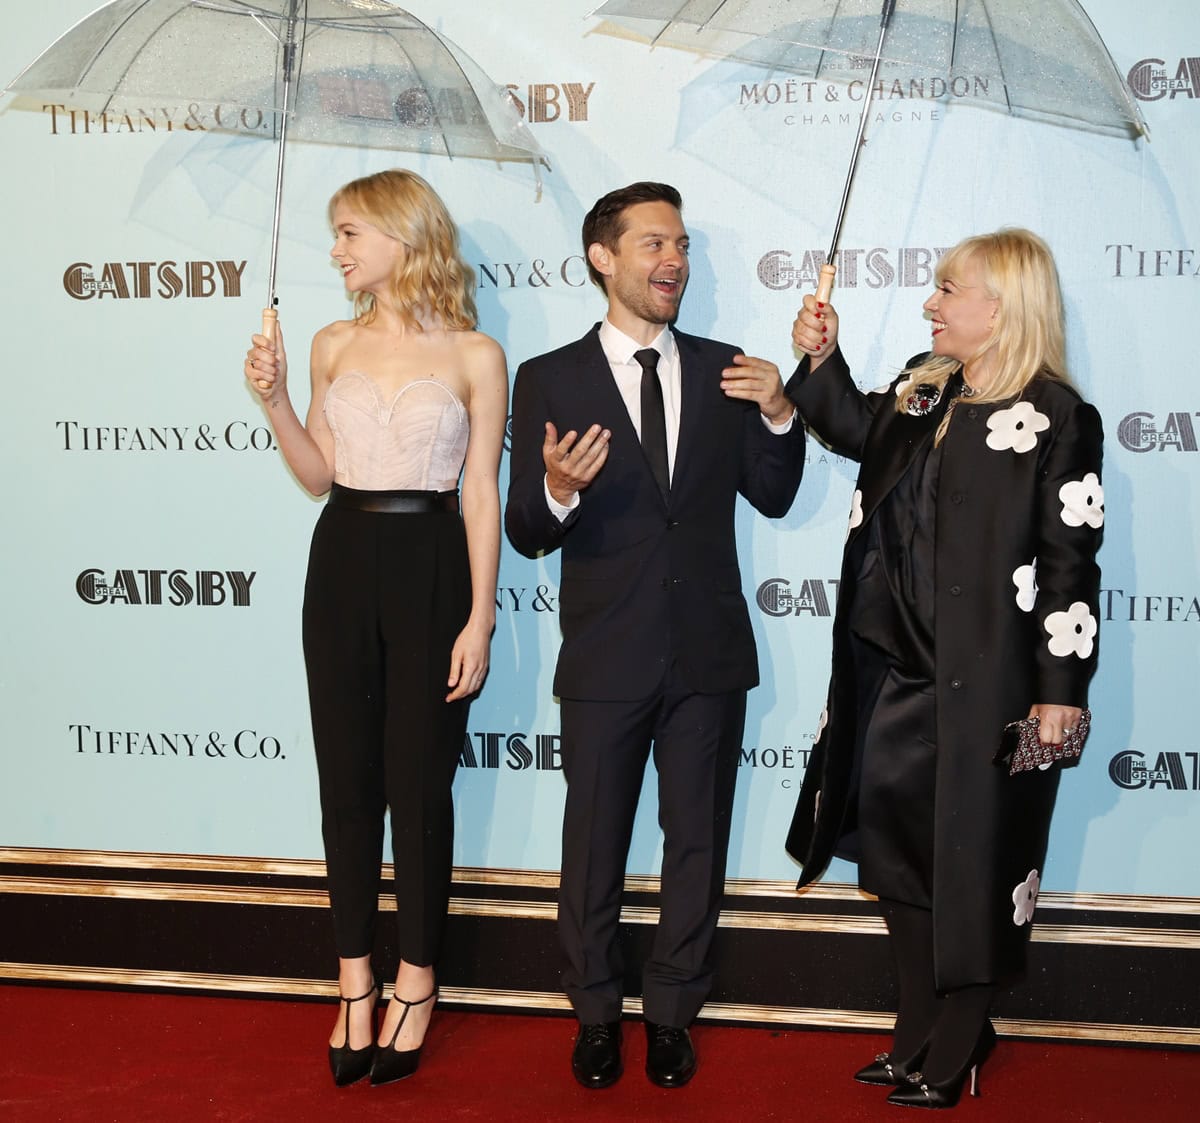 Carey Mulligan steals the spotlight alongside Tobey Maguire and Catherine Martin at the Sydney premiere of 'The Great Gatsby'